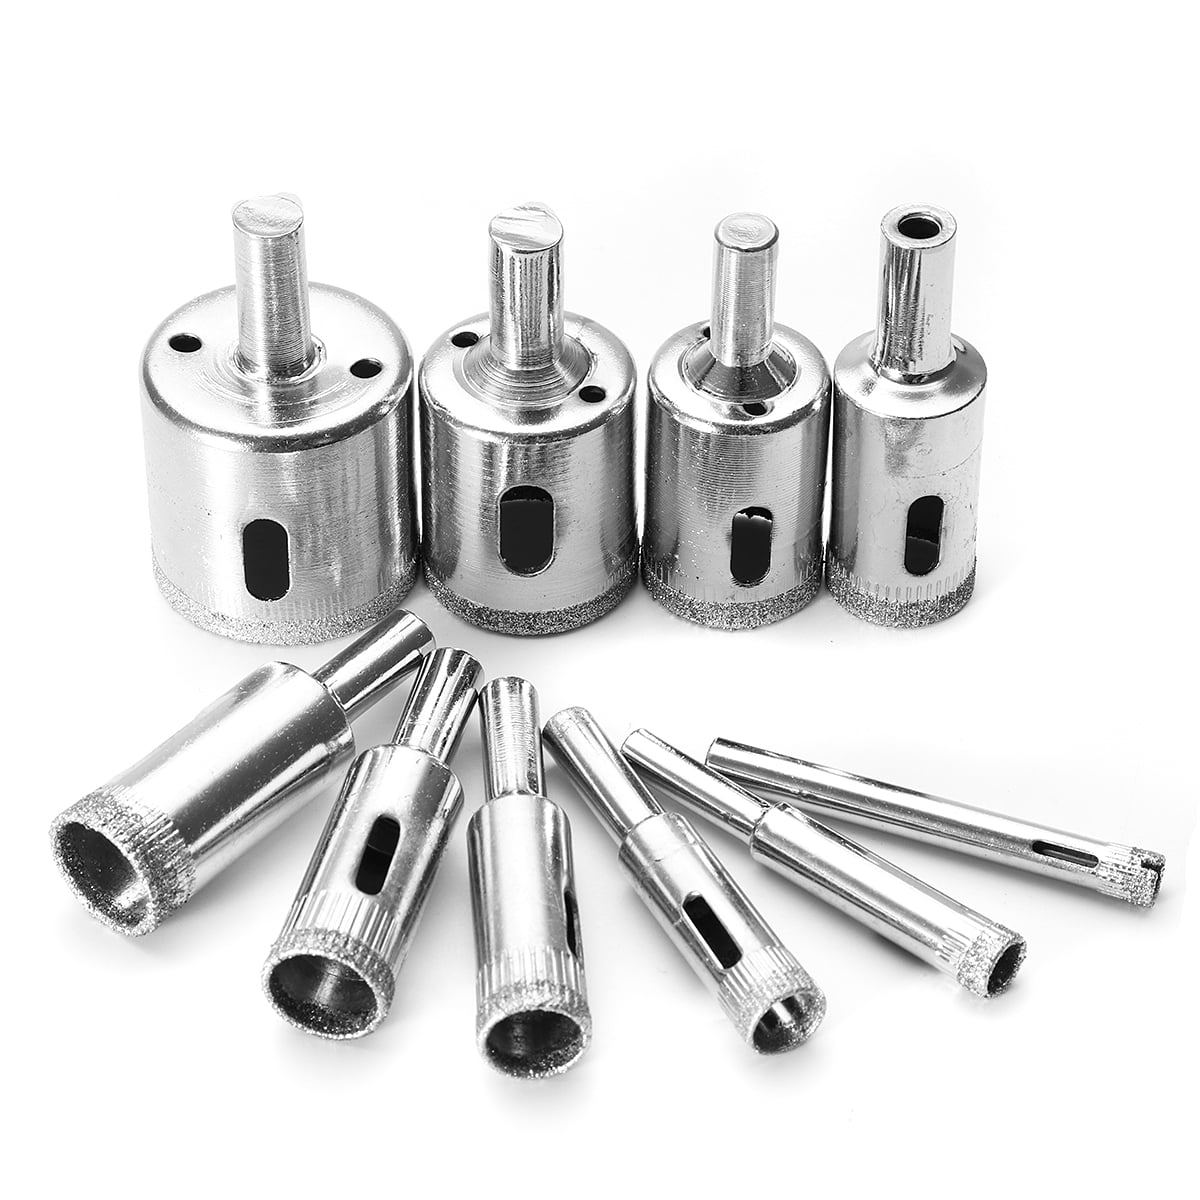 -Multifunctional Ceramic Glass Hole Working Sets Ultimate Drill Bits 4pcs 